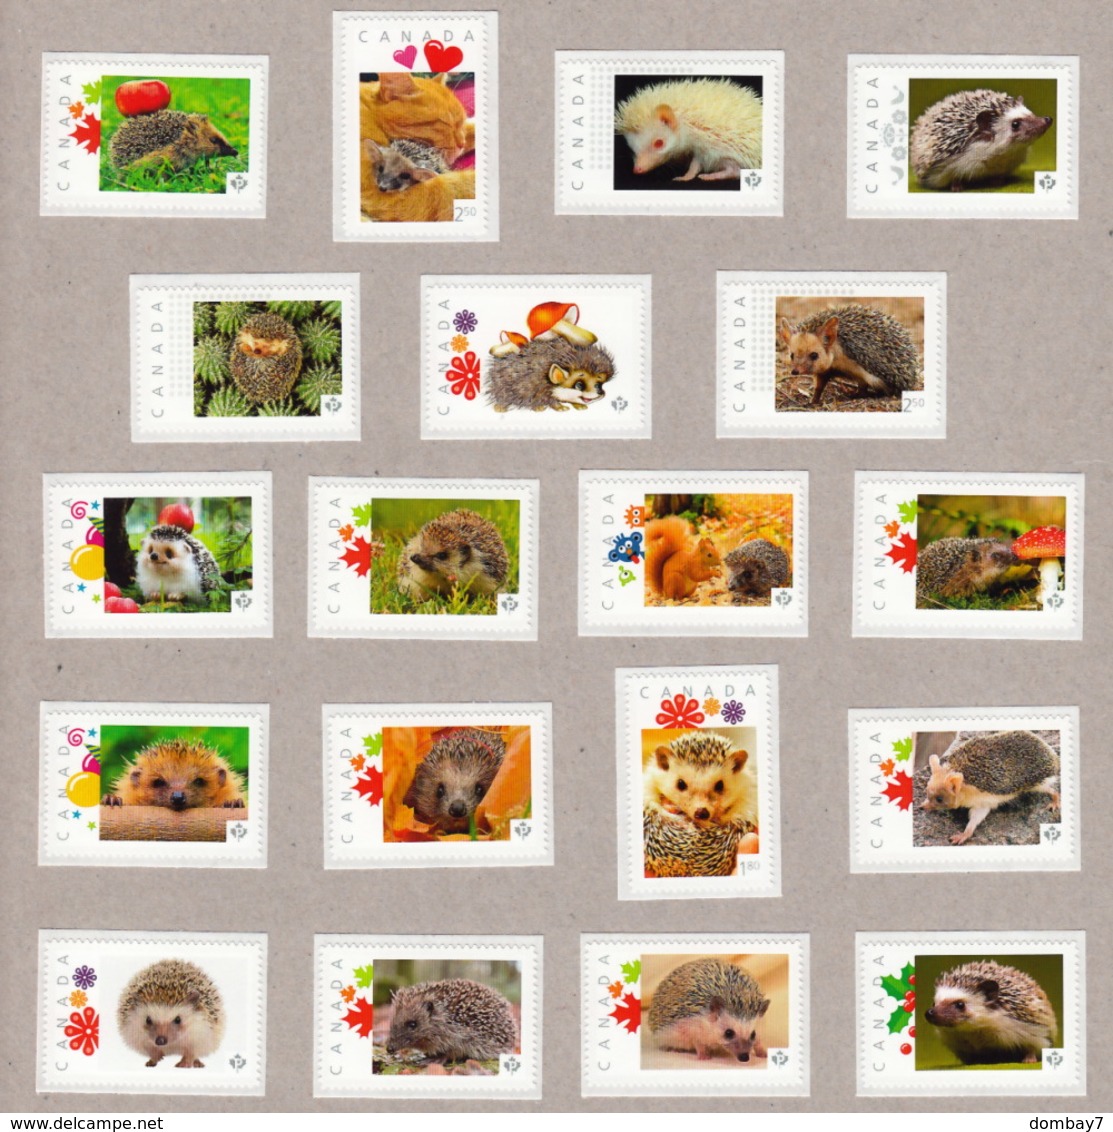 HEDGEHOG, ERIZO, RICCIO, IGEL, Hérisson MNH Stamps LIMITED! ONLY 2 Collection Available! ONLY HERE! Canada 2014-2015 - Roditori